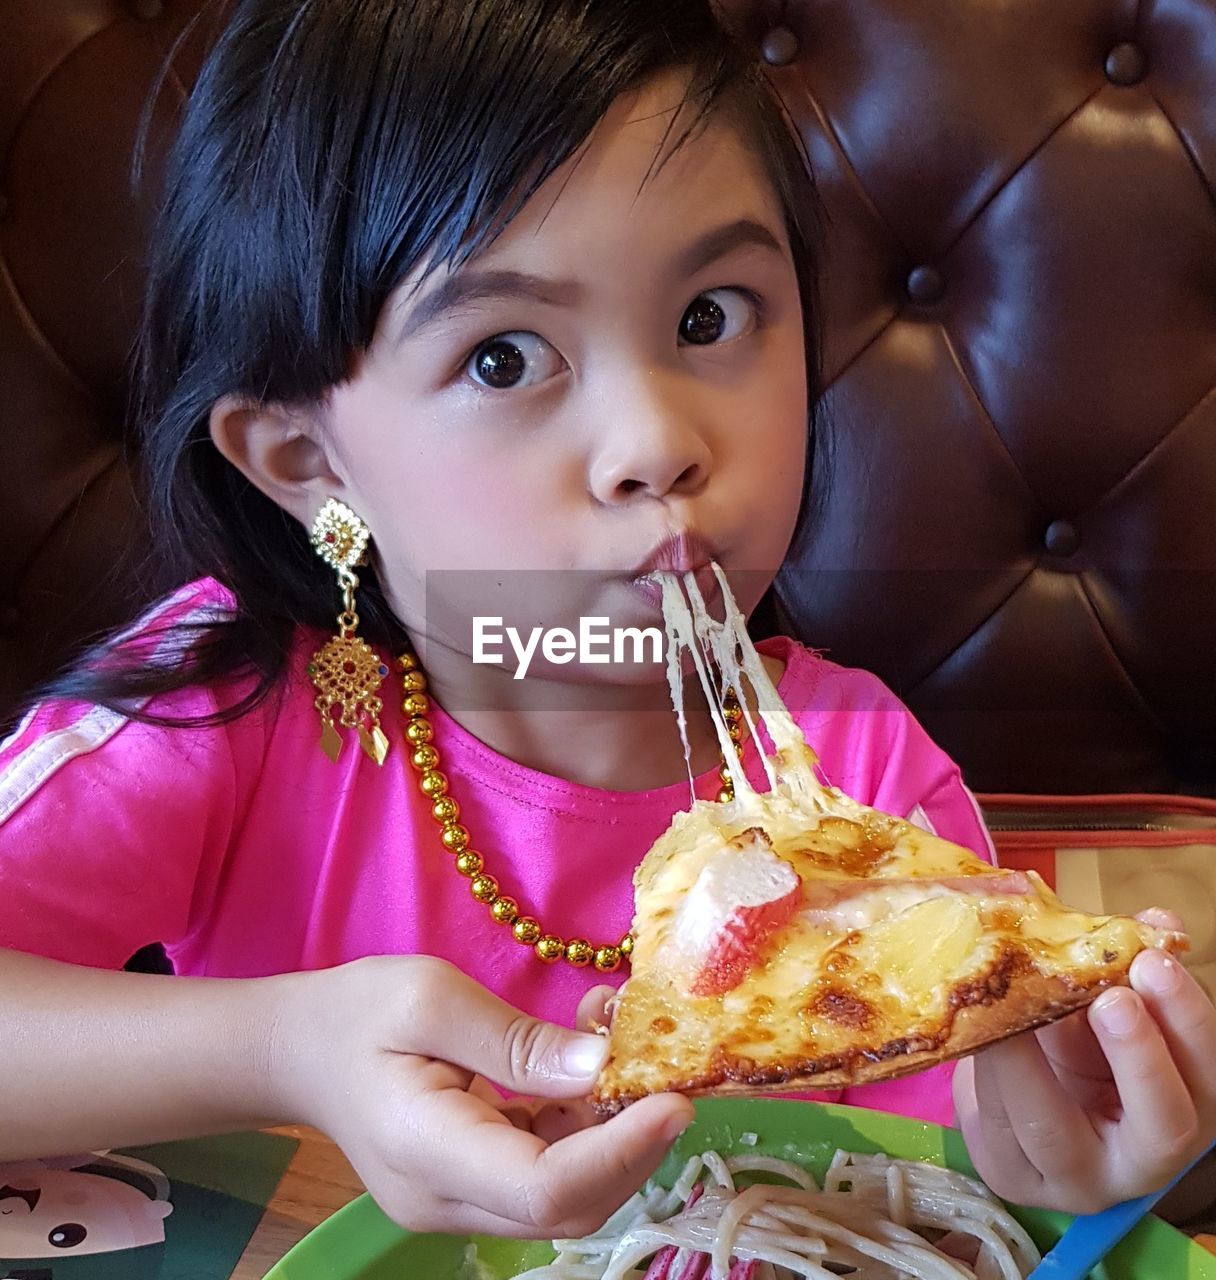 Cute girl eating pizza while sitting in restaurant